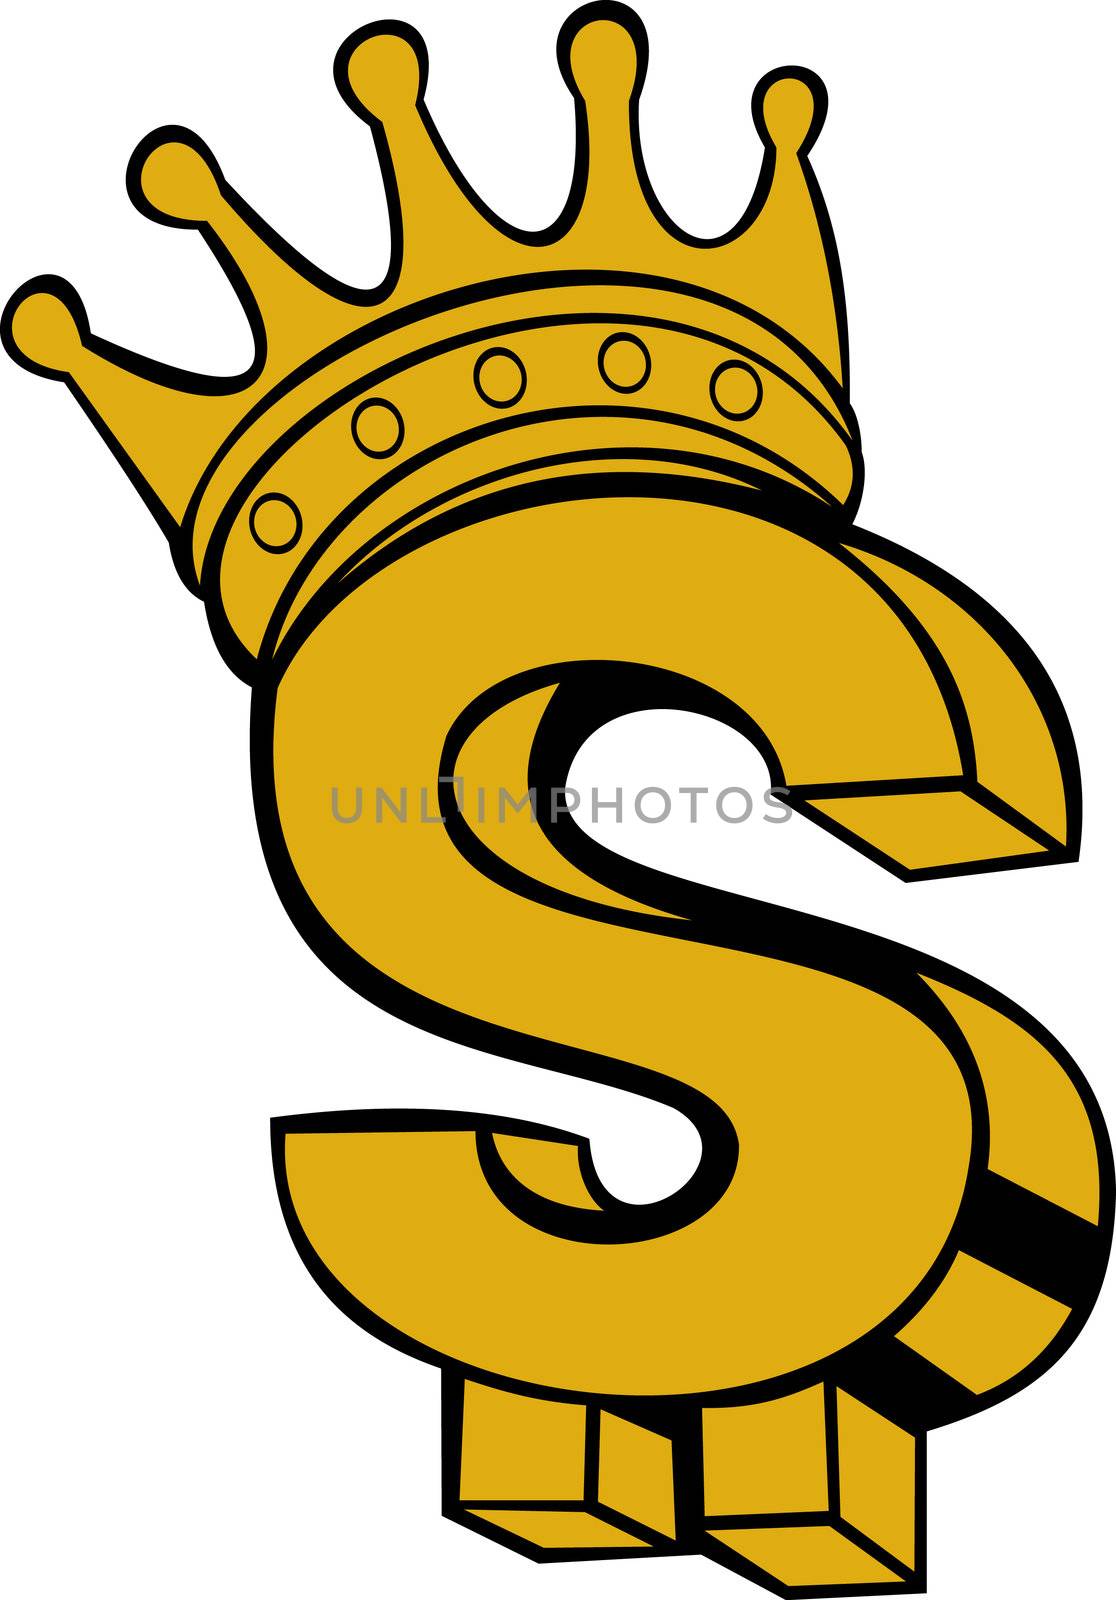 gold dollar sign with crown by patrimonio